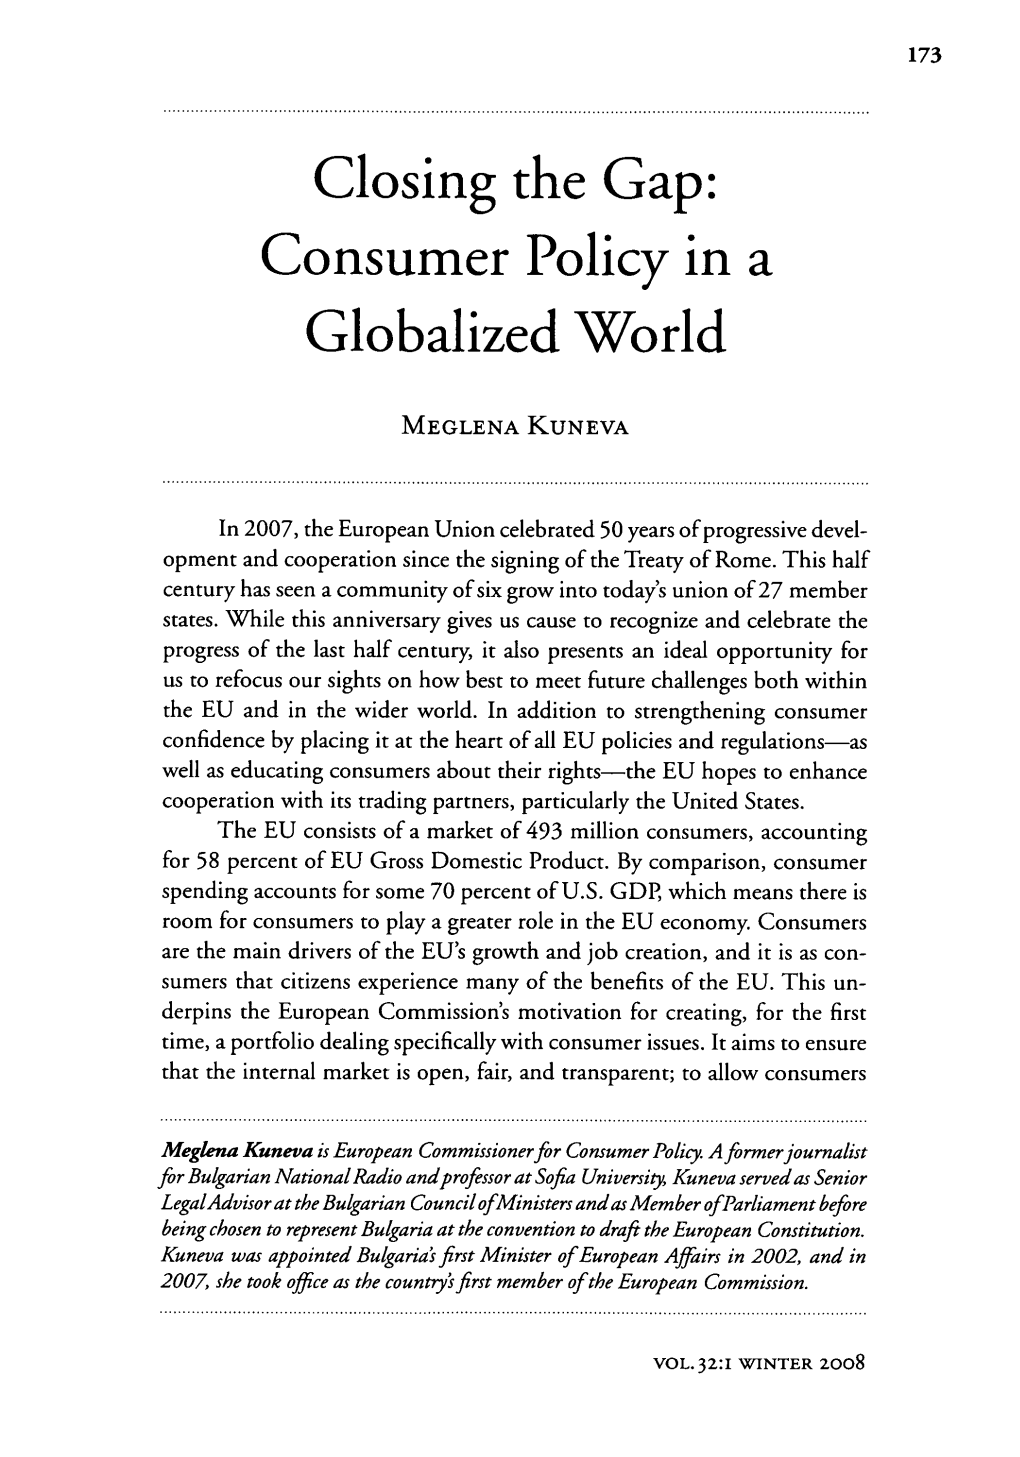 Consumer Policy in a Globalized World